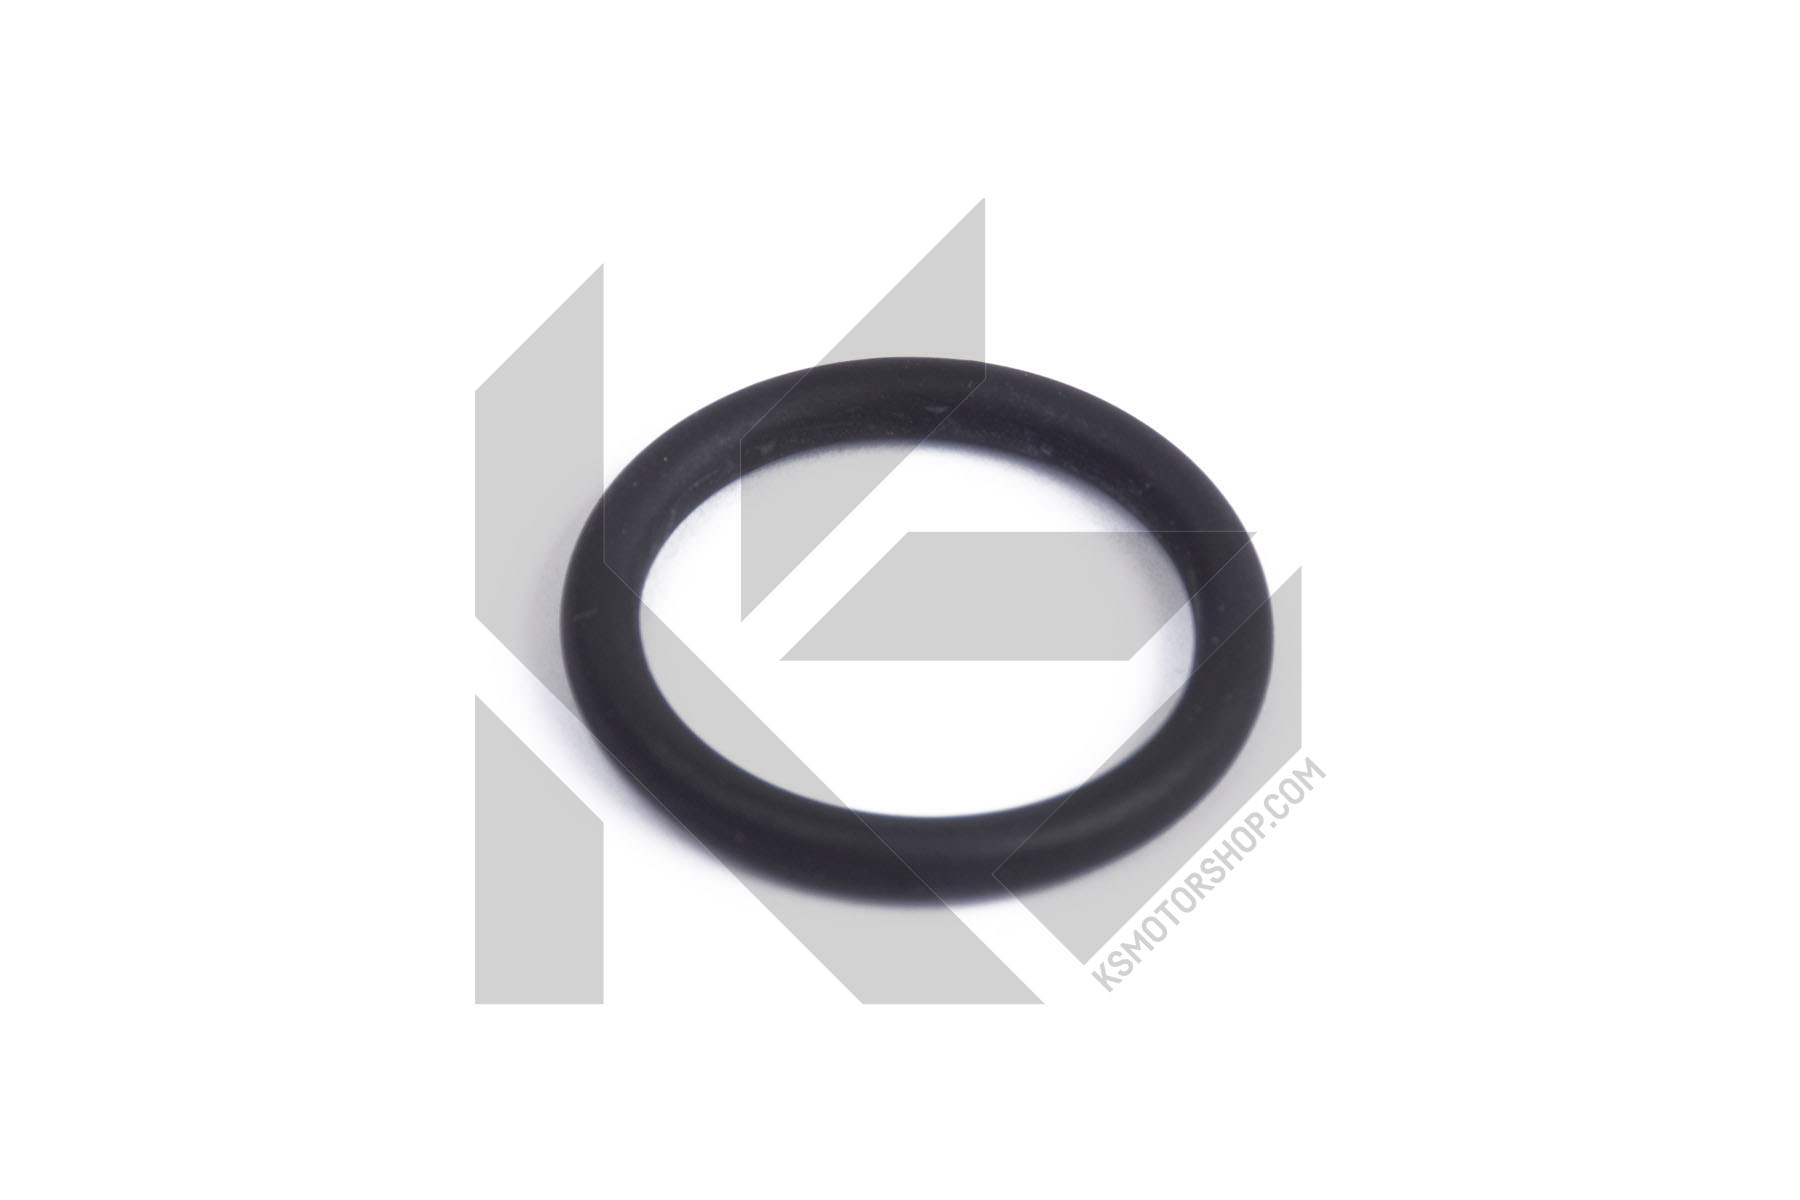 000.230, Seal Ring, O-ring kit, ELRING, 0179973345, 4890926, 51.96501-0502, 99610590103, 0219976248, 51.96501-0699, 5419970545, 01.10.138, 104678, F00RJ01026, 51965010502, A0179973345, A419970545, A5419970545